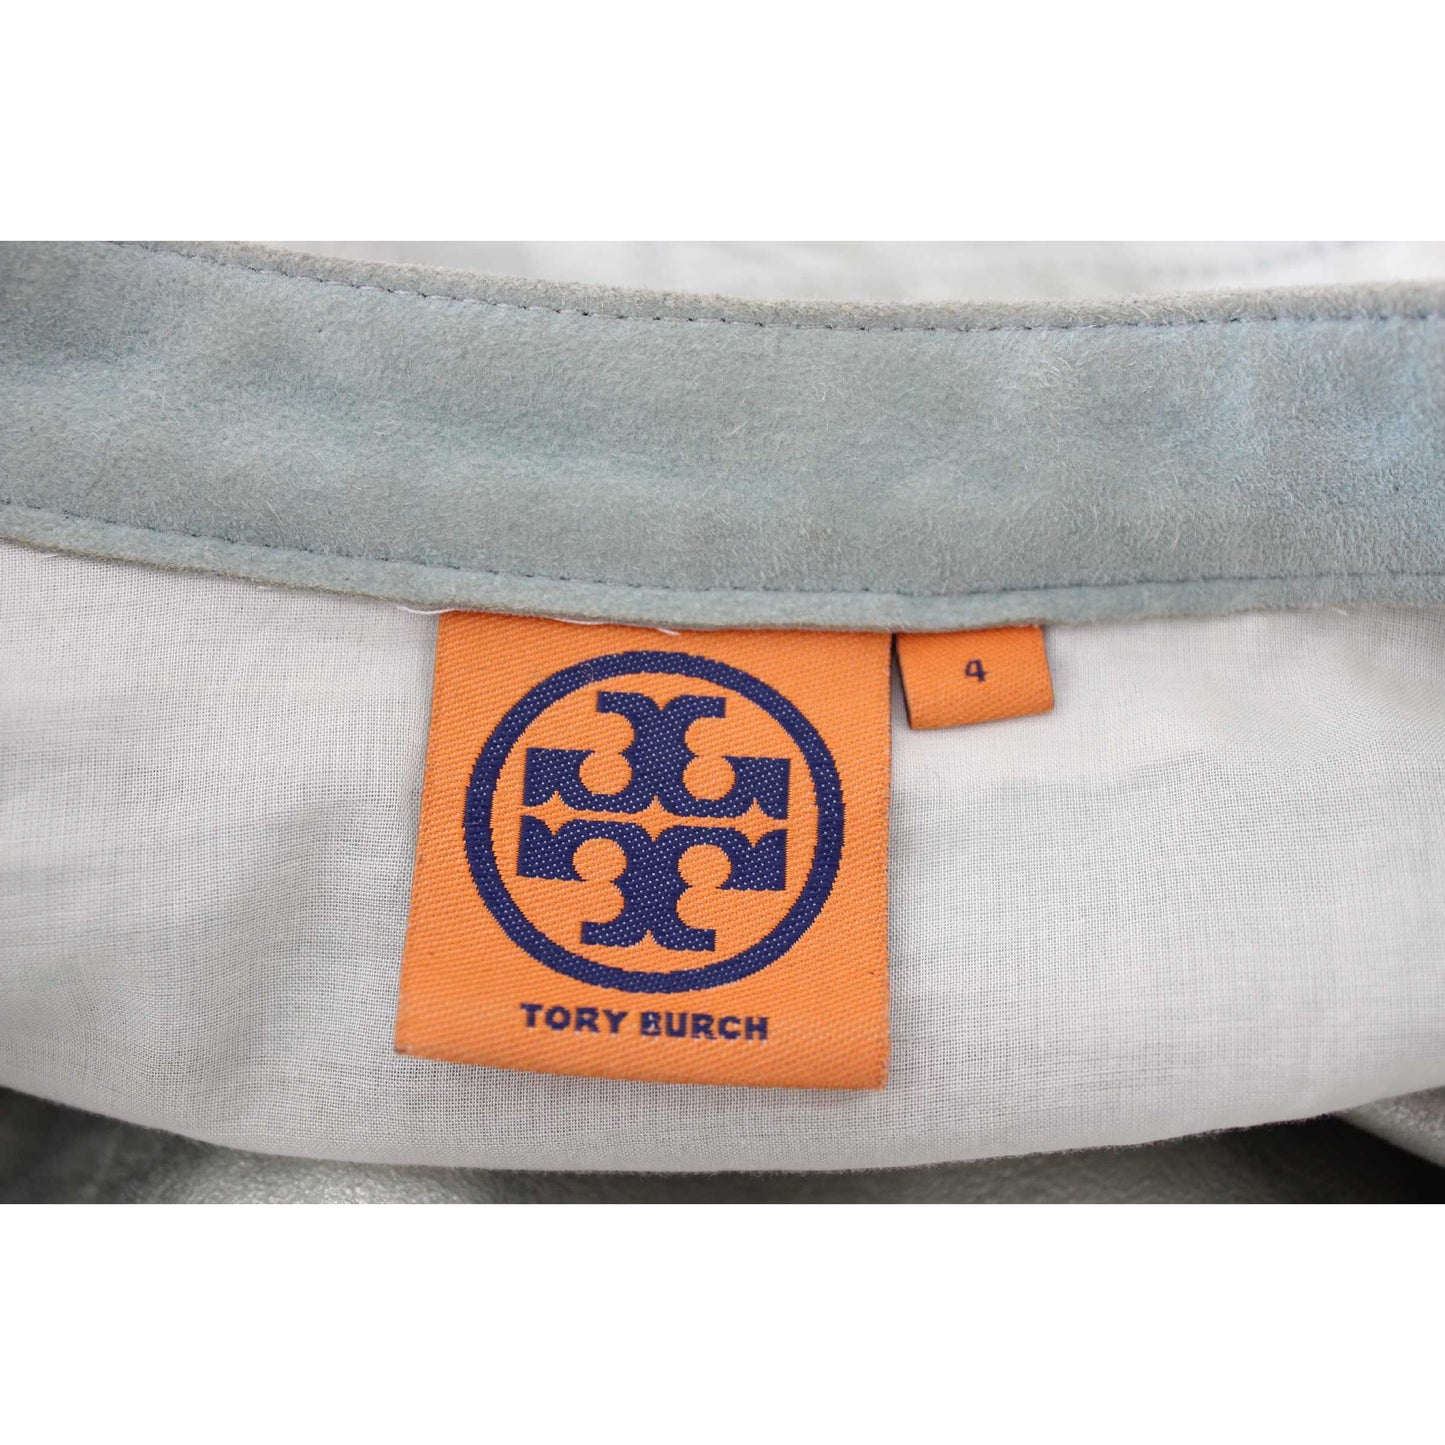 Tory Burch Shirt Tunica Suede Laminated Vintage Gray